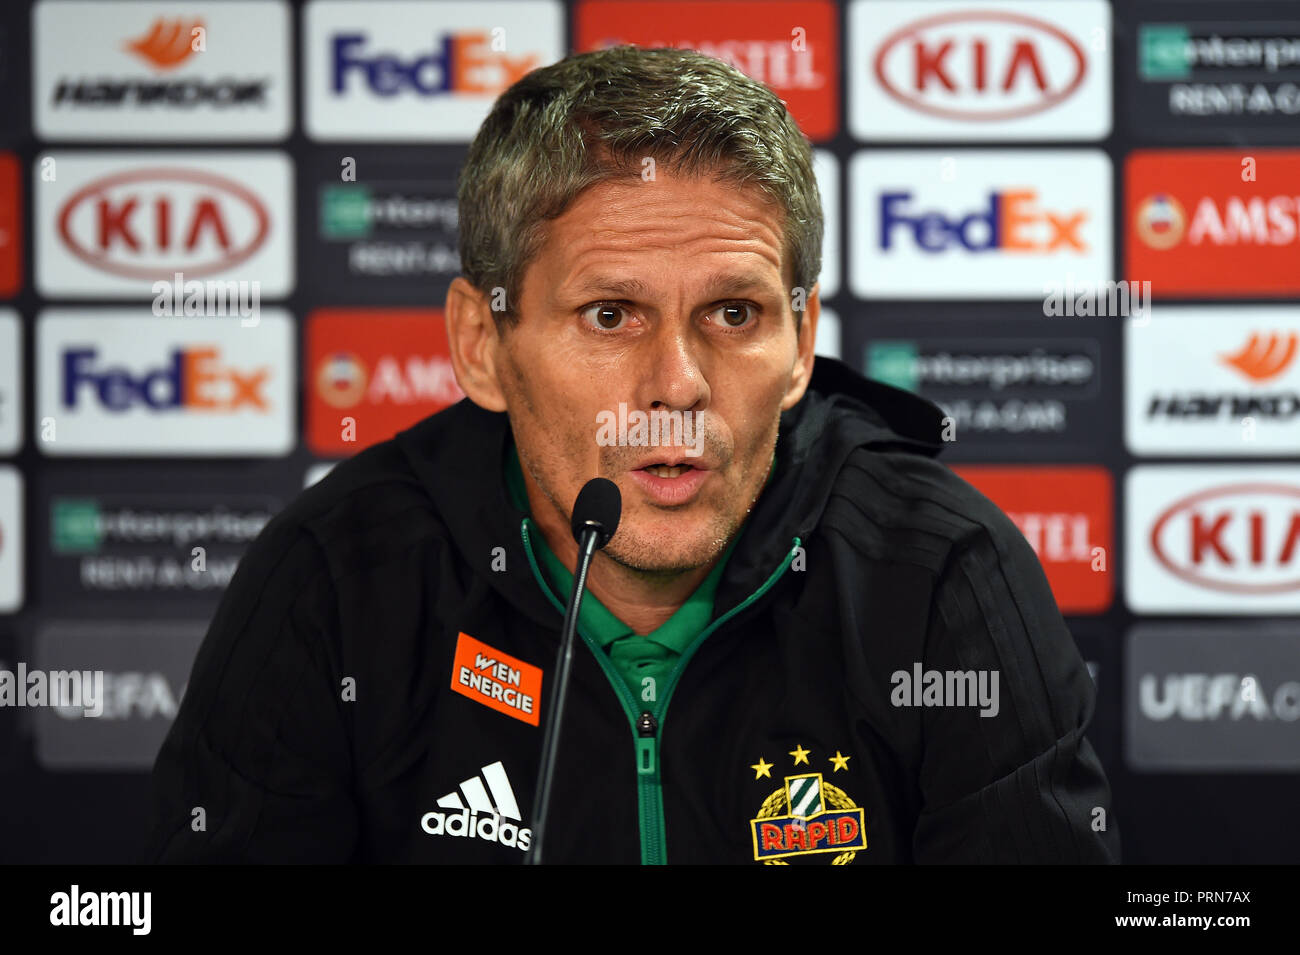 Glasgow, Scotland. Wednesday 3rd October 2018.   Rapid Wein manager Dietmar Kühbauer addresses the media at a press conference ahead of their Europa League Matchday 2 match against Glasgow Rangers at Ibrox Stadium, Glasgow, Scotland on Wednesday 3rd October 2018 2018.   Picture Andy Buchanan Credit: Andy Buchanan/Alamy Live News Stock Photo